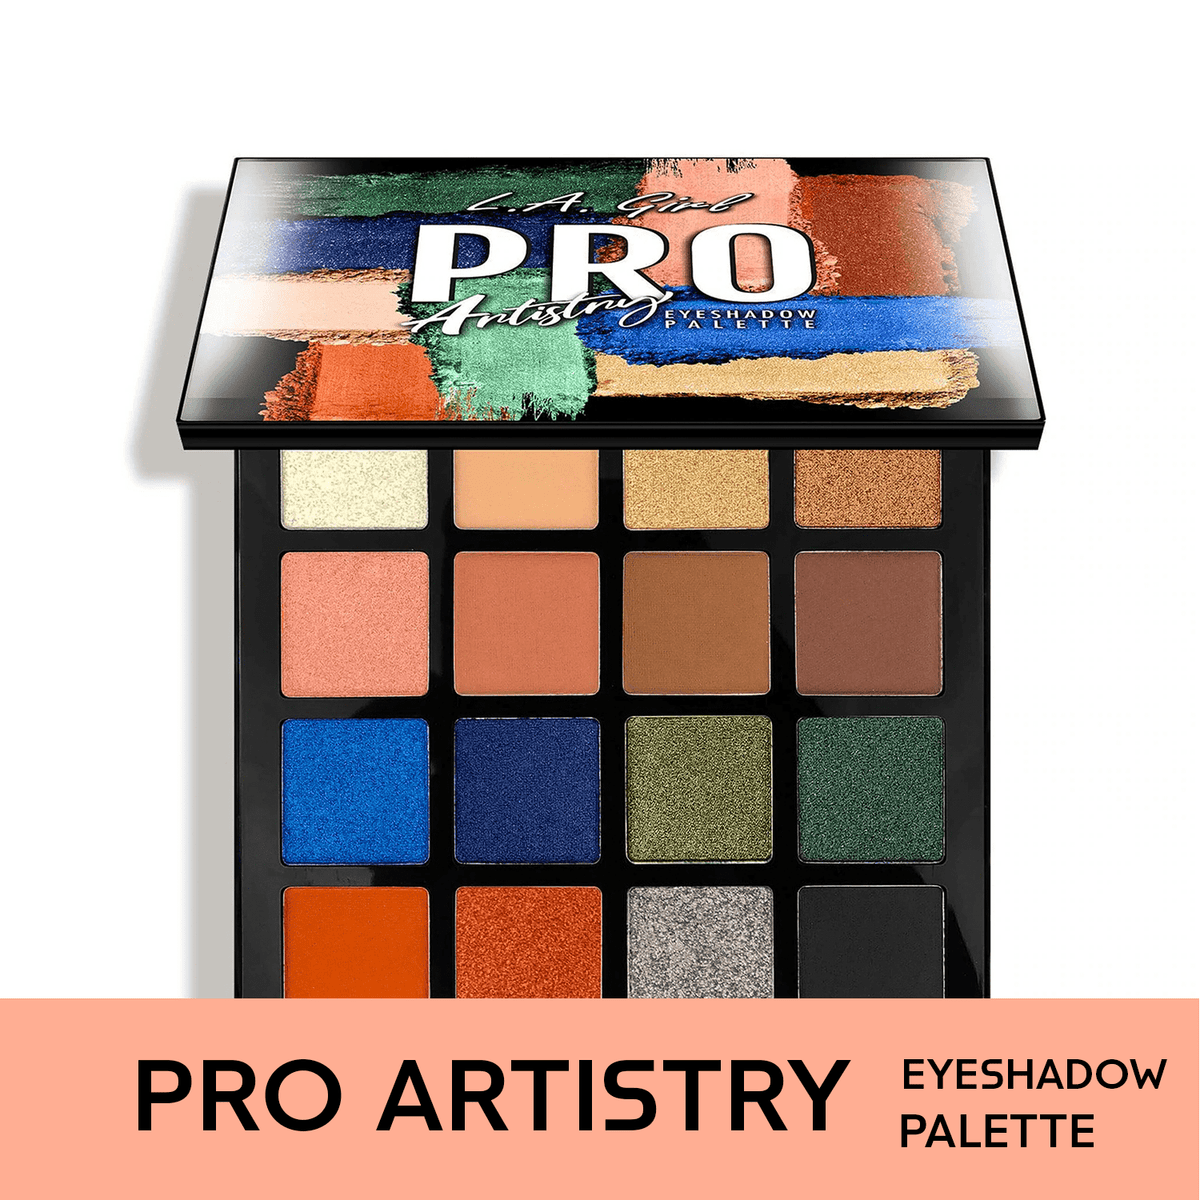 l-a-girl-pro-artistry-eyeshadow-palette-16-colors